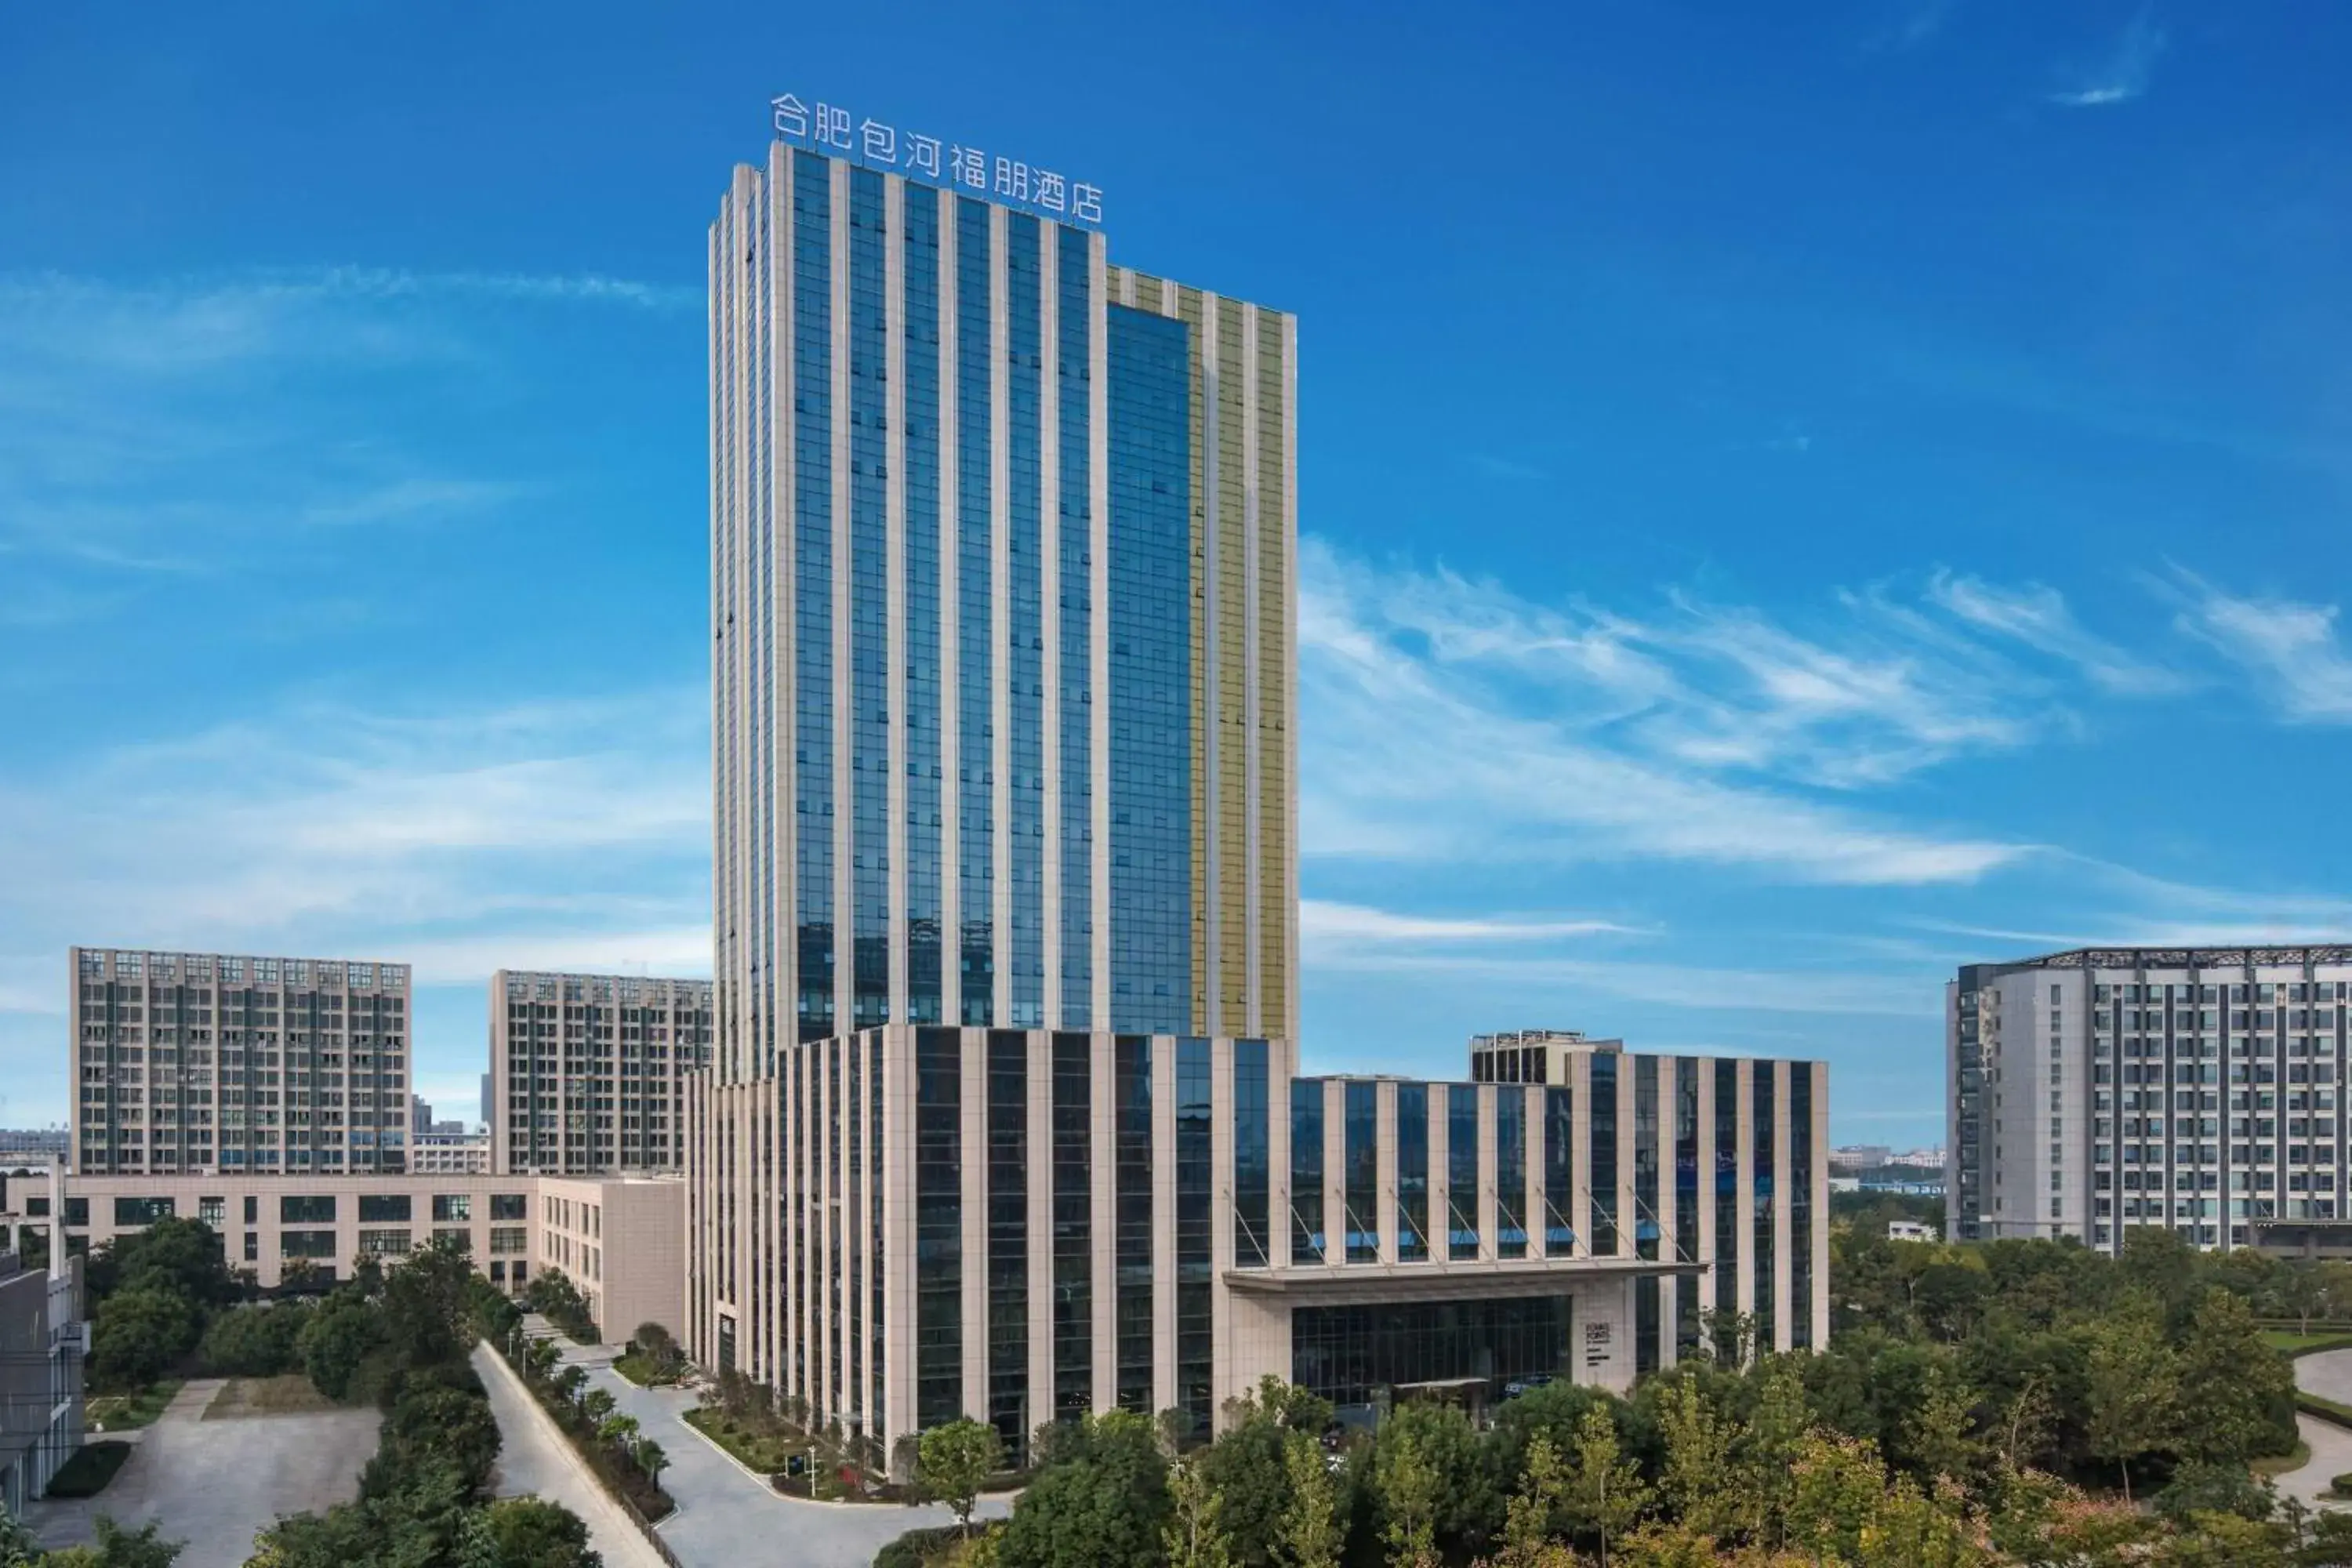 Property building in Four Points by Sheraton Hefei, Baohe